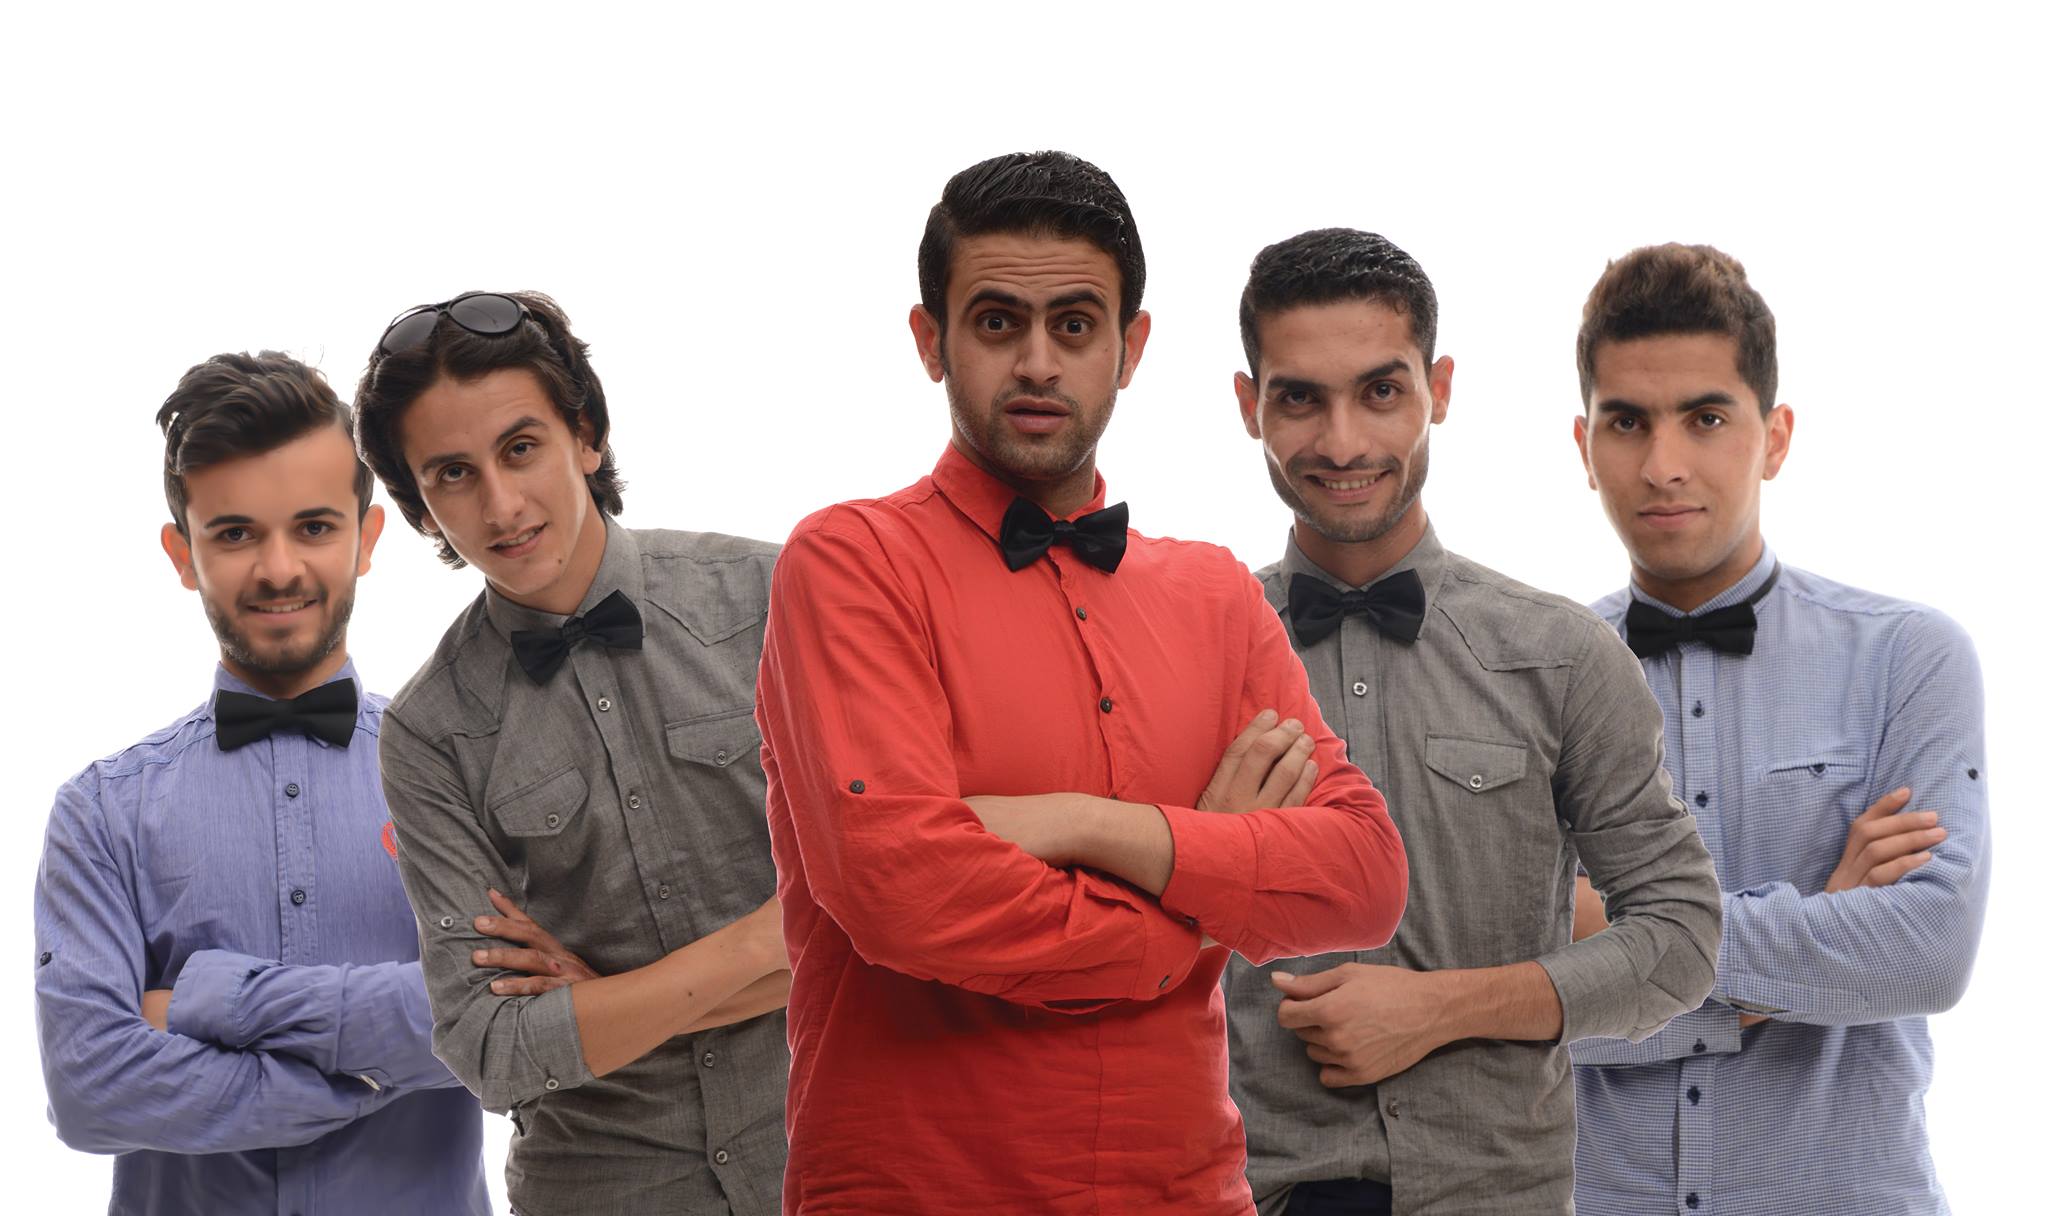 The members of the Gaza comedy group